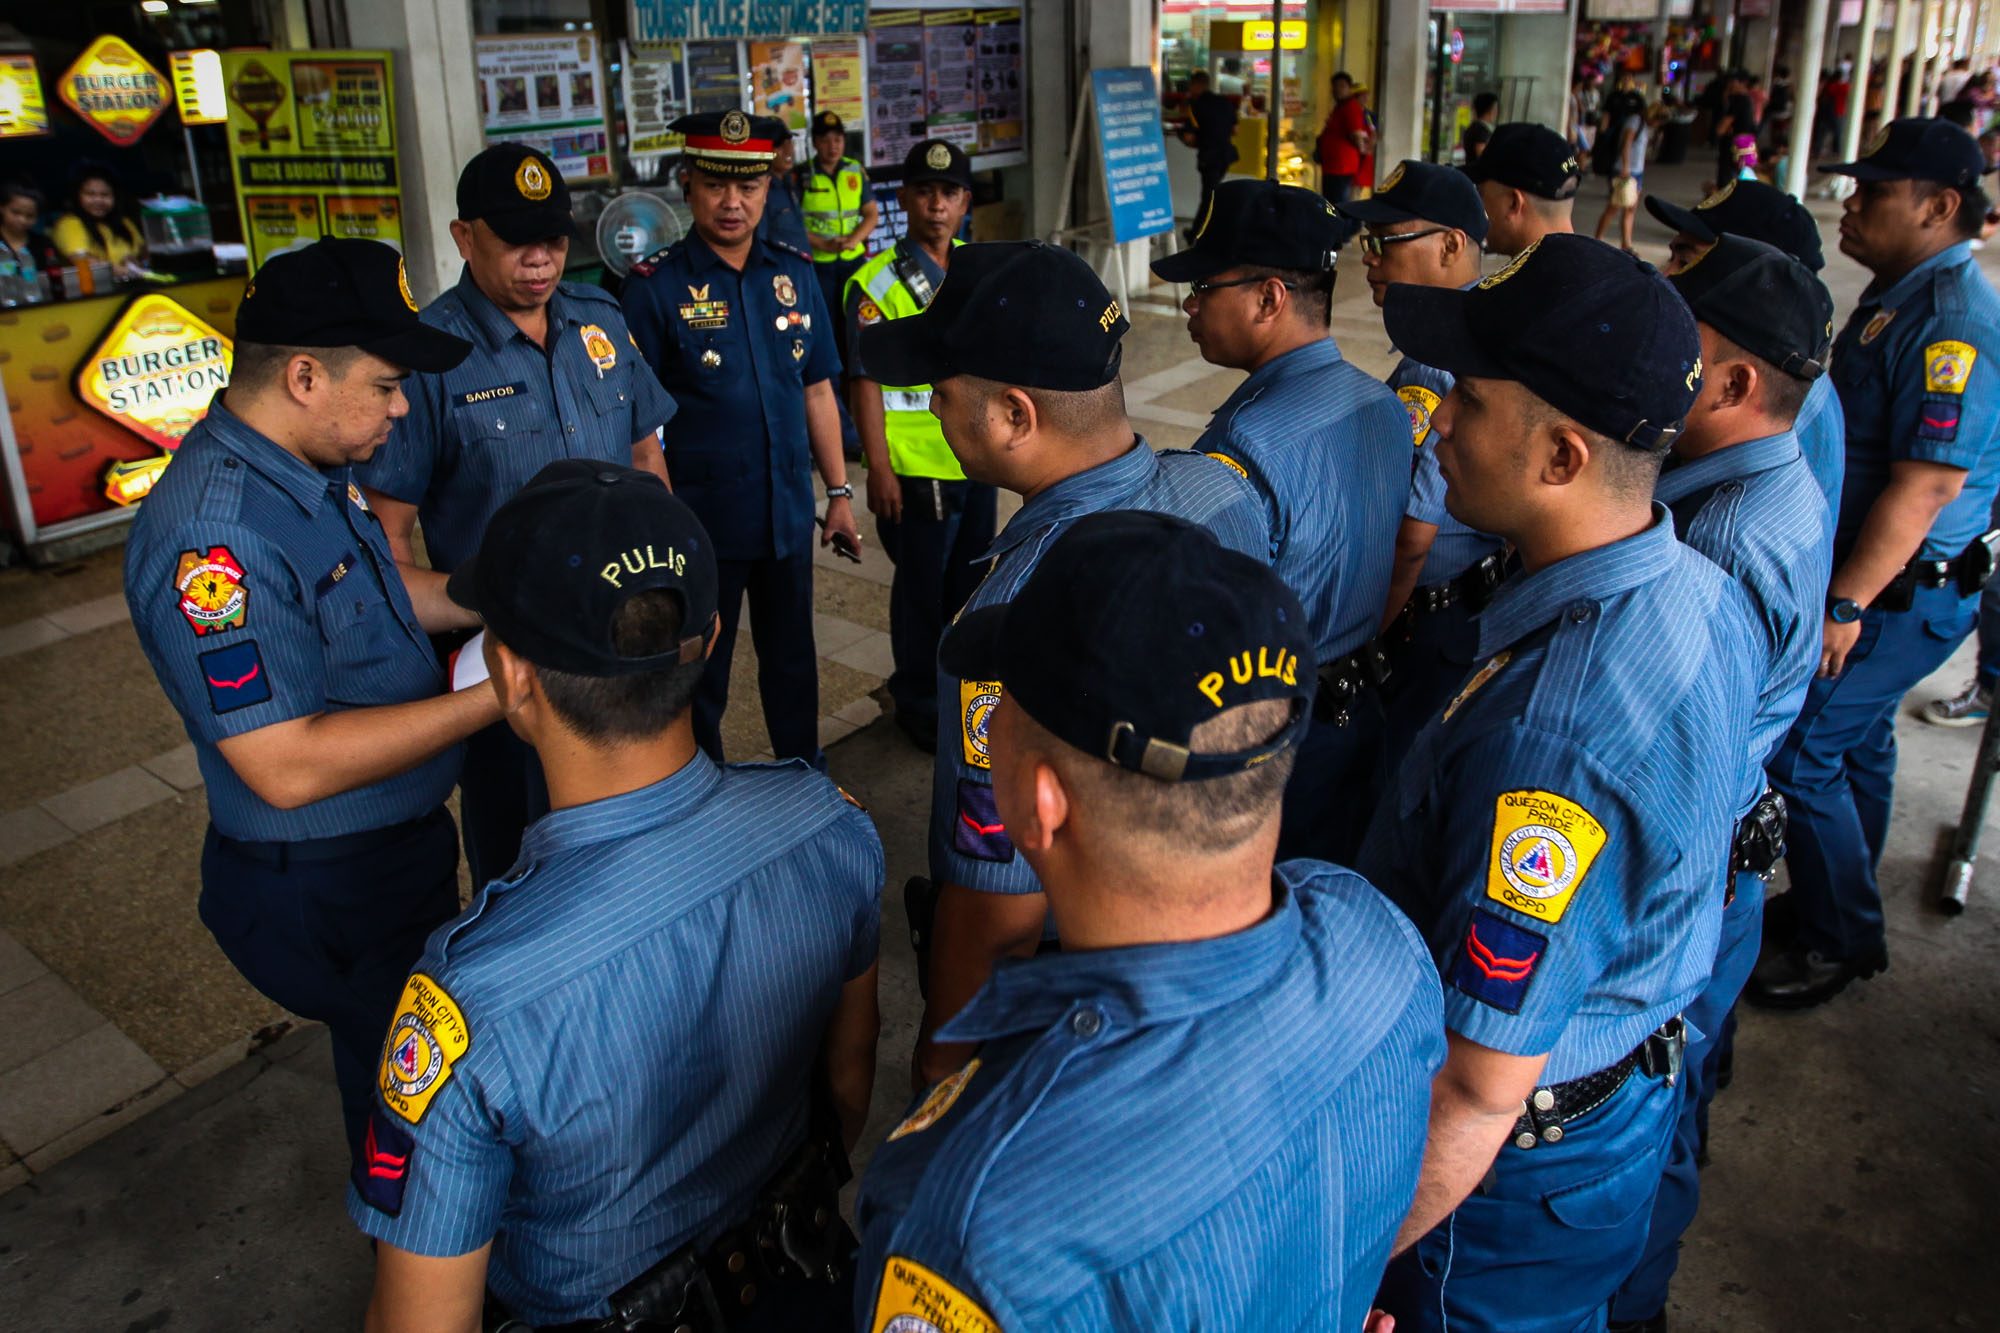 From SPO1 to sergeant: New law gives military rank names to police